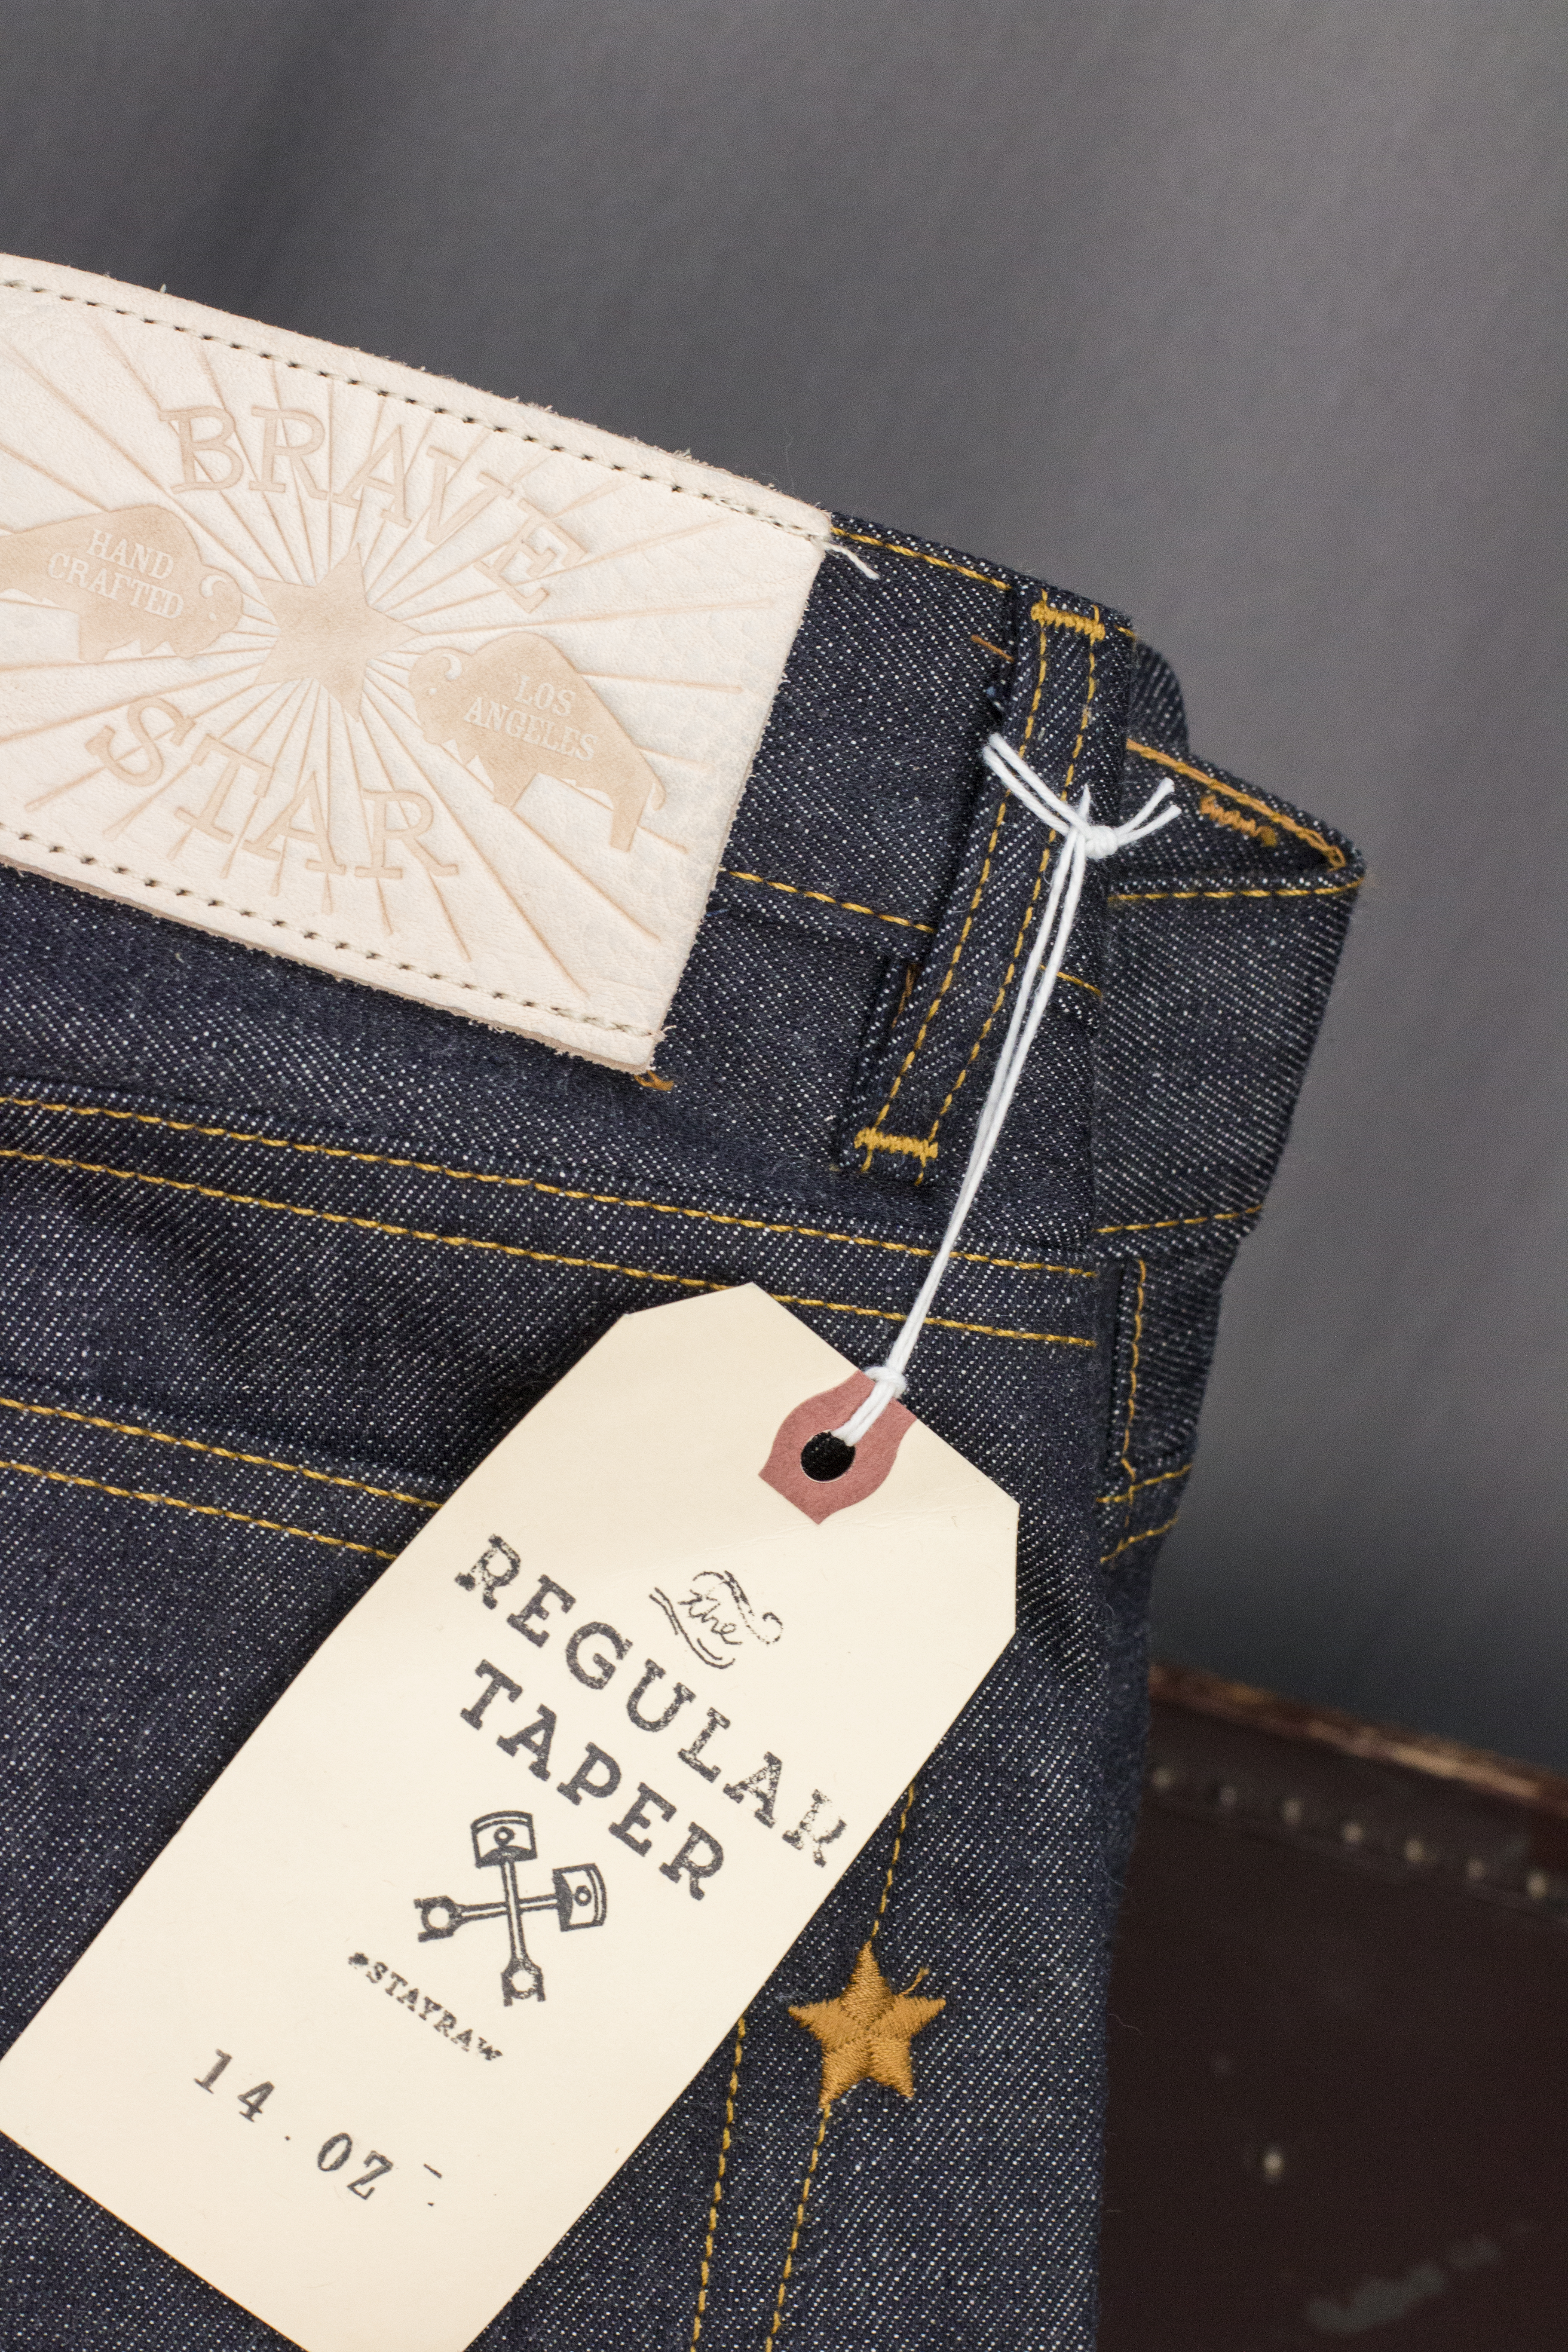 21.5 OZ, 100 WEARS - My Brave Star Selvage Jeans Review 